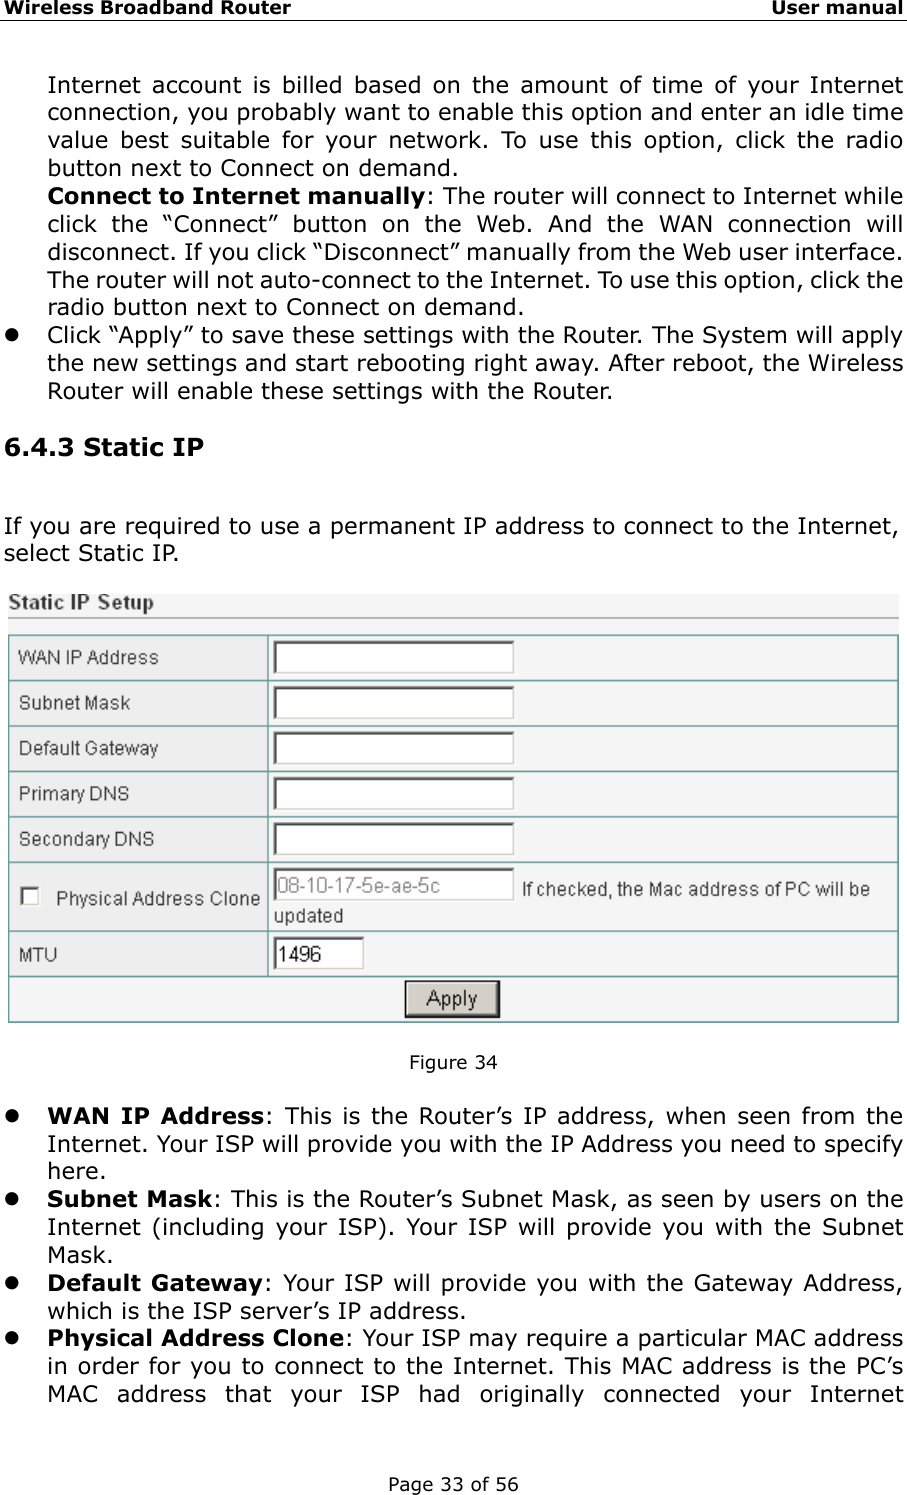 Wireless Broadband Router                                                   User manual Page 33 of 56 Internet account is billed based on the amount of time of your Internet connection, you probably want to enable this option and enter an idle time value best suitable for your network. To use this option, click the radio button next to Connect on demand. Connect to Internet manually: The router will connect to Internet while click the “Connect” button on the Web. And the WAN connection will disconnect. If you click “Disconnect” manually from the Web user interface. The router will not auto-connect to the Internet. To use this option, click the radio button next to Connect on demand. z Click “Apply” to save these settings with the Router. The System will apply the new settings and start rebooting right away. After reboot, the Wireless Router will enable these settings with the Router. 6.4.3 Static IP If you are required to use a permanent IP address to connect to the Internet, select Static IP.    Figure 34  z WAN IP Address: This is the Router’s IP address, when seen from the Internet. Your ISP will provide you with the IP Address you need to specify here. z Subnet Mask: This is the Router’s Subnet Mask, as seen by users on the Internet (including your ISP). Your ISP will provide you with the Subnet Mask. z Default Gateway: Your ISP will provide you with the Gateway Address, which is the ISP server’s IP address. z Physical Address Clone: Your ISP may require a particular MAC address in order for you to connect to the Internet. This MAC address is the PC’s MAC address that your ISP had originally connected your Internet 